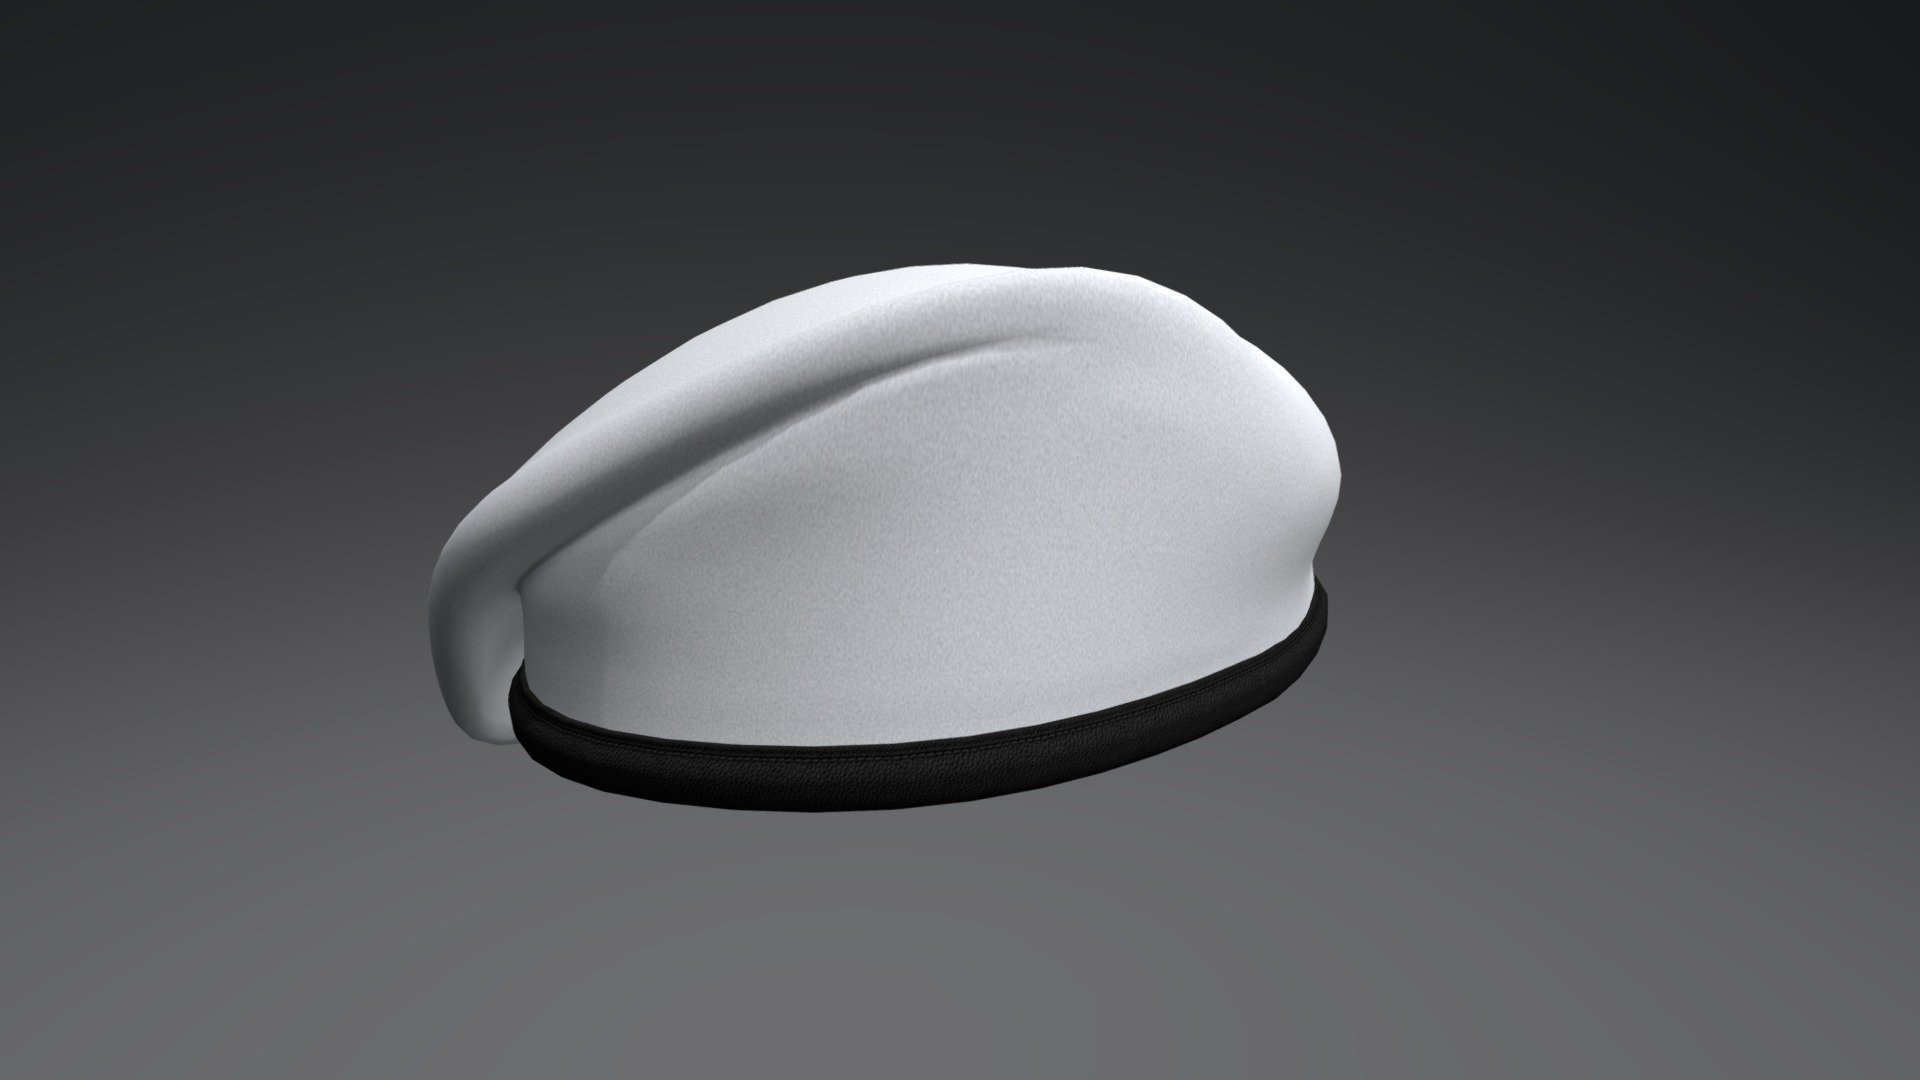 A beret is a soft, round, flat-crowned hat, usually of woven, hand-knitted wool, crocheted cotton, wool felt, or acrylic fibre. Mass production of berets began in the 19th century France and Spain, and the beret remains associated with these countries. Berets are worn as part of the uniform of many military and police units worldwide, as well as by other organizations.

*1 model (medium poly) with textures and materials 3d model